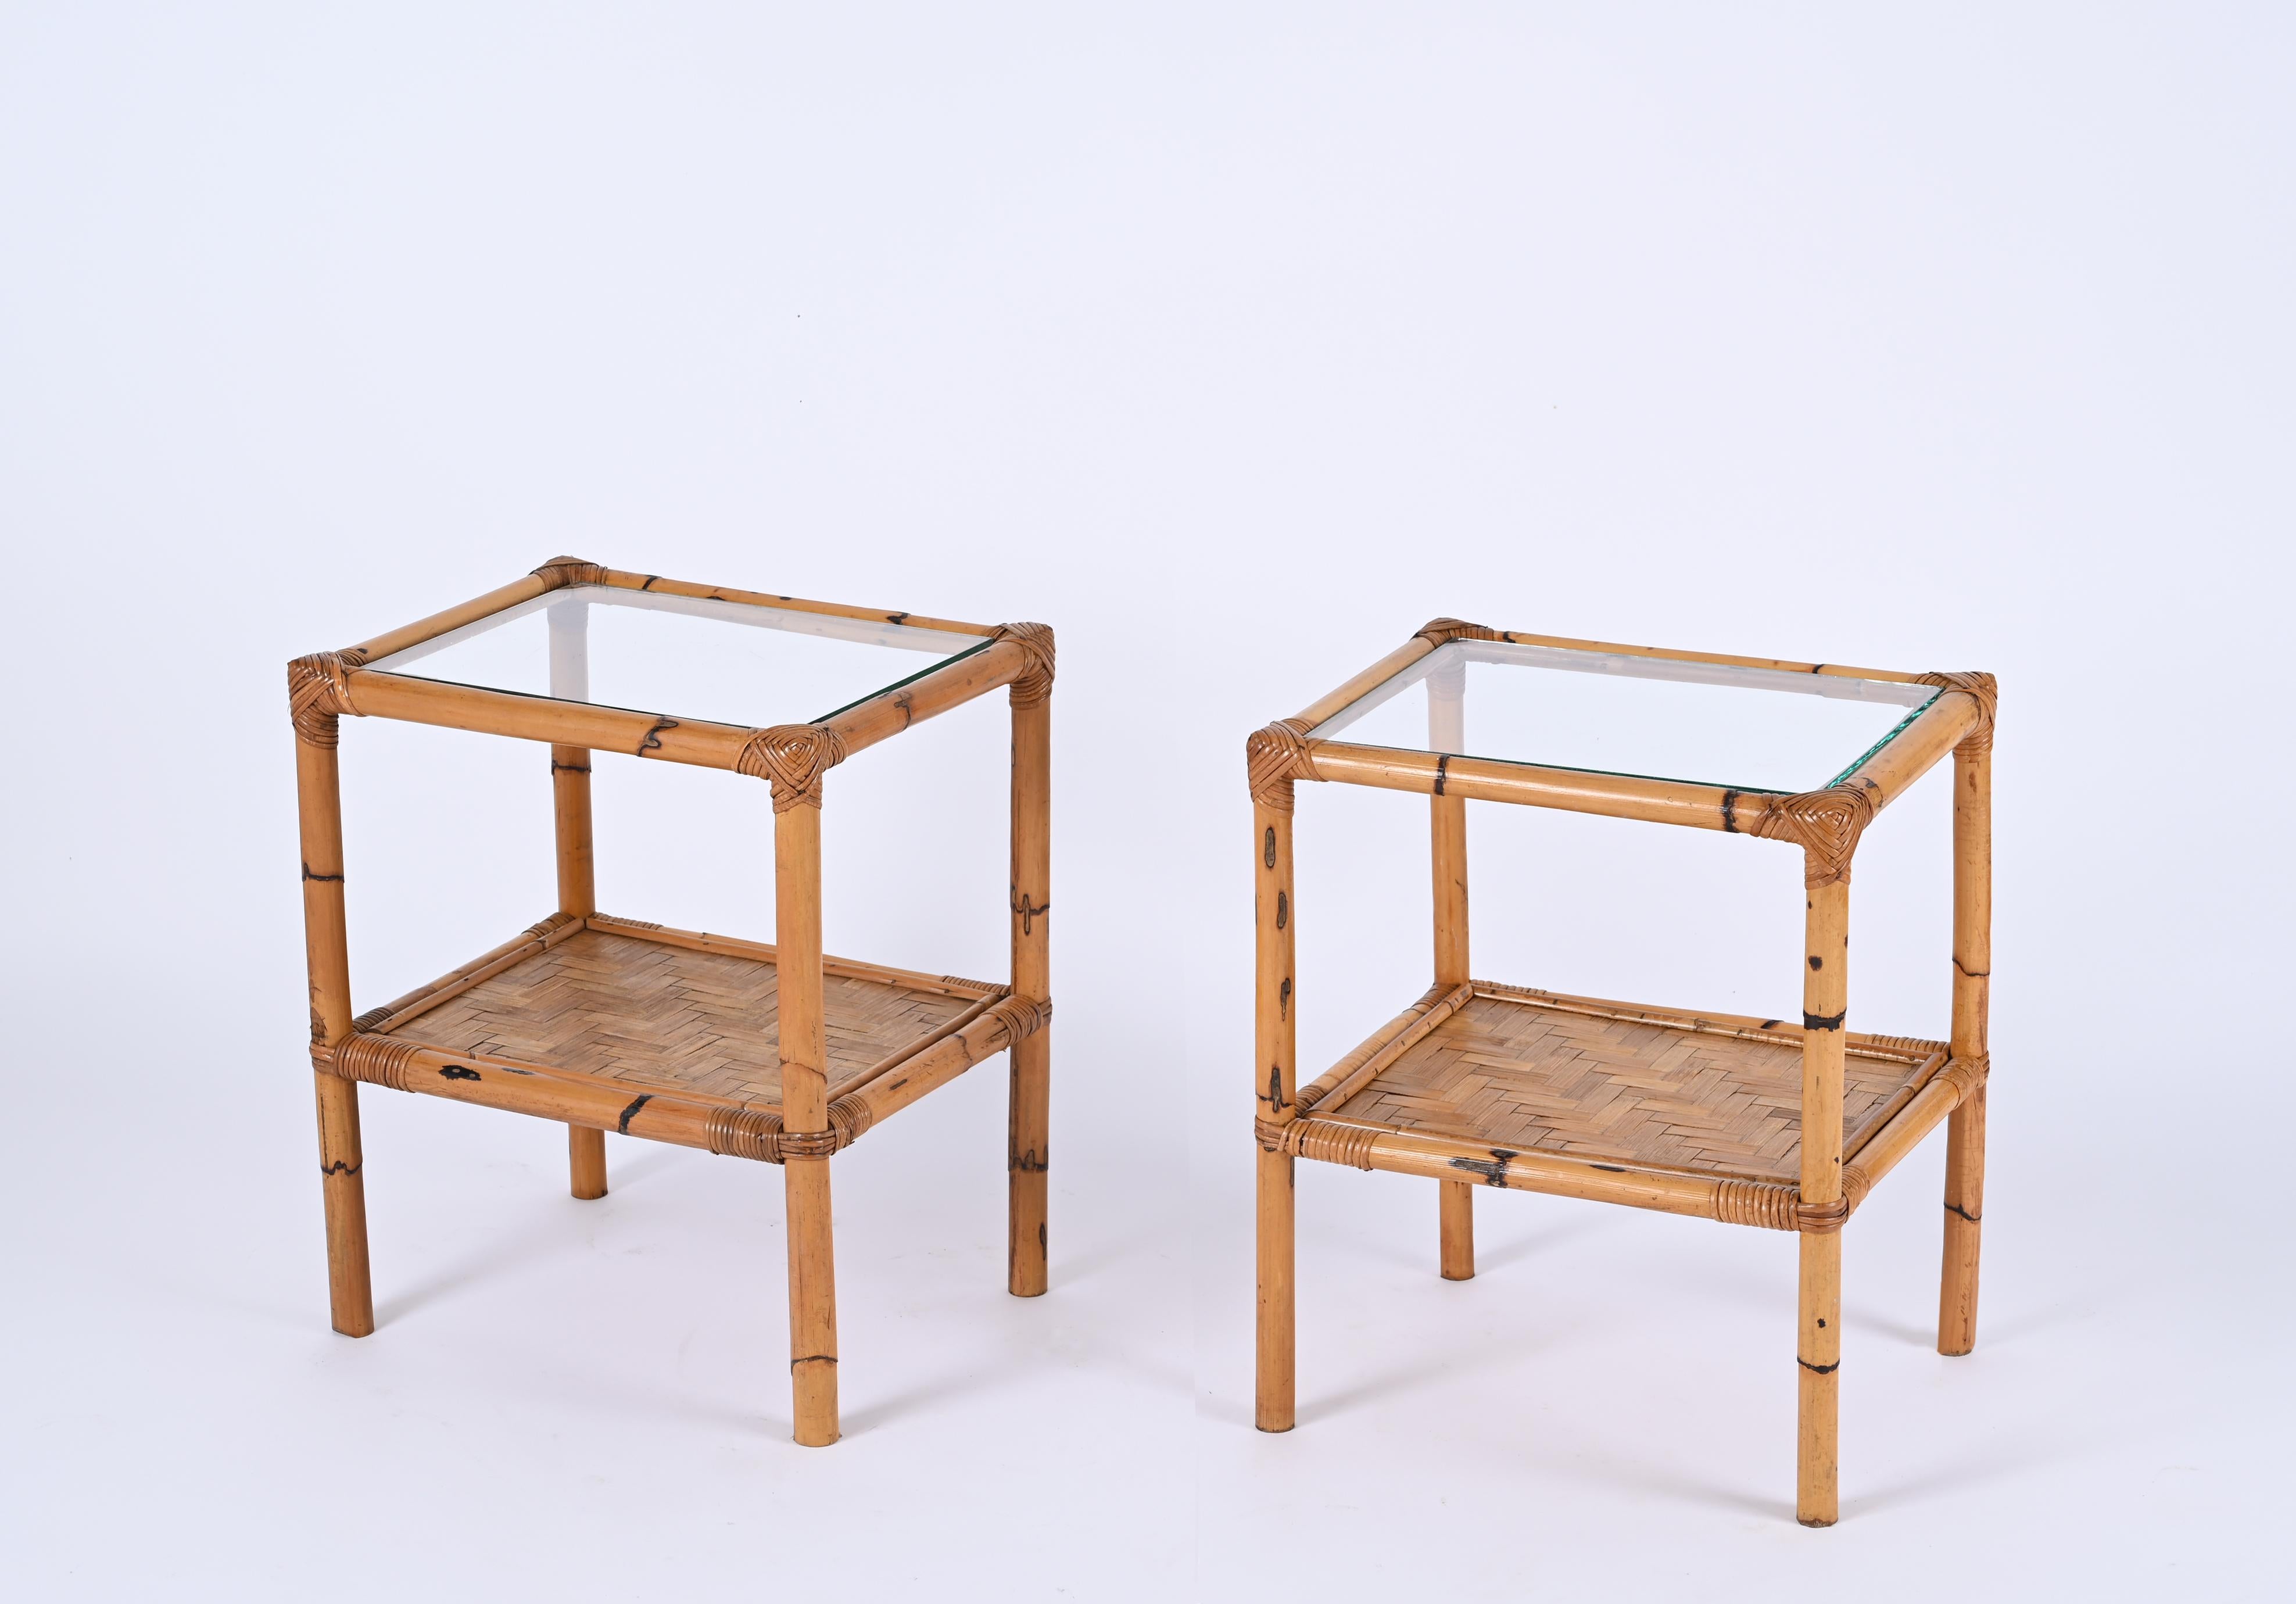 Pair of Mid-Century Italian Bedside Tables in Bamboo, Rattan and Glass, 1970s For Sale 2